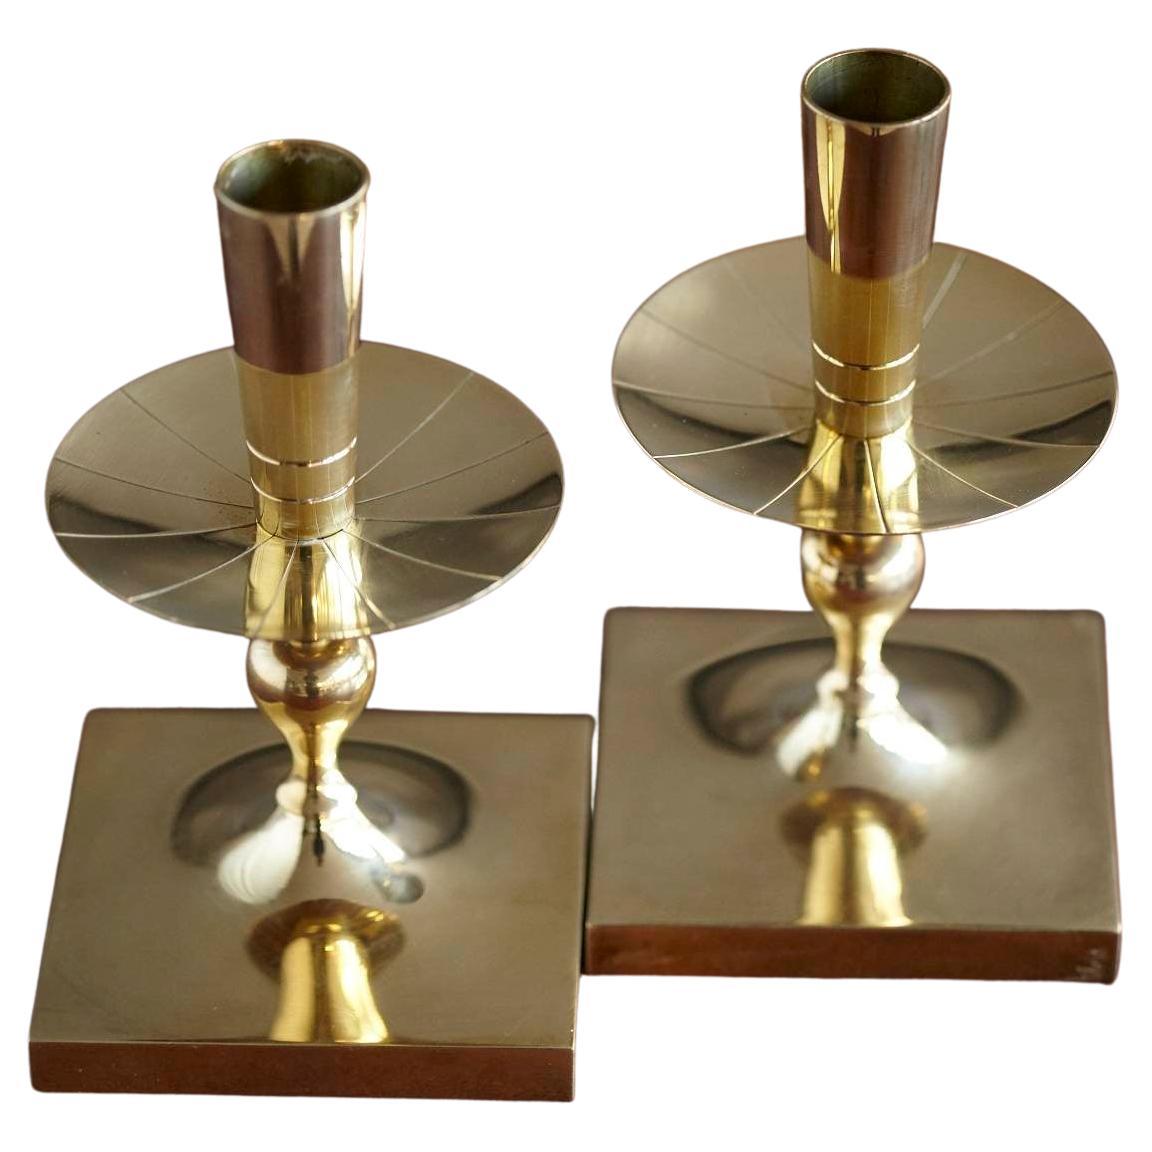 Elegant pair of Tommi Parzinger solid brass candleholders made by Dorlyn Silversmiths New York, manufacturers hallmark engraved on the bottom.